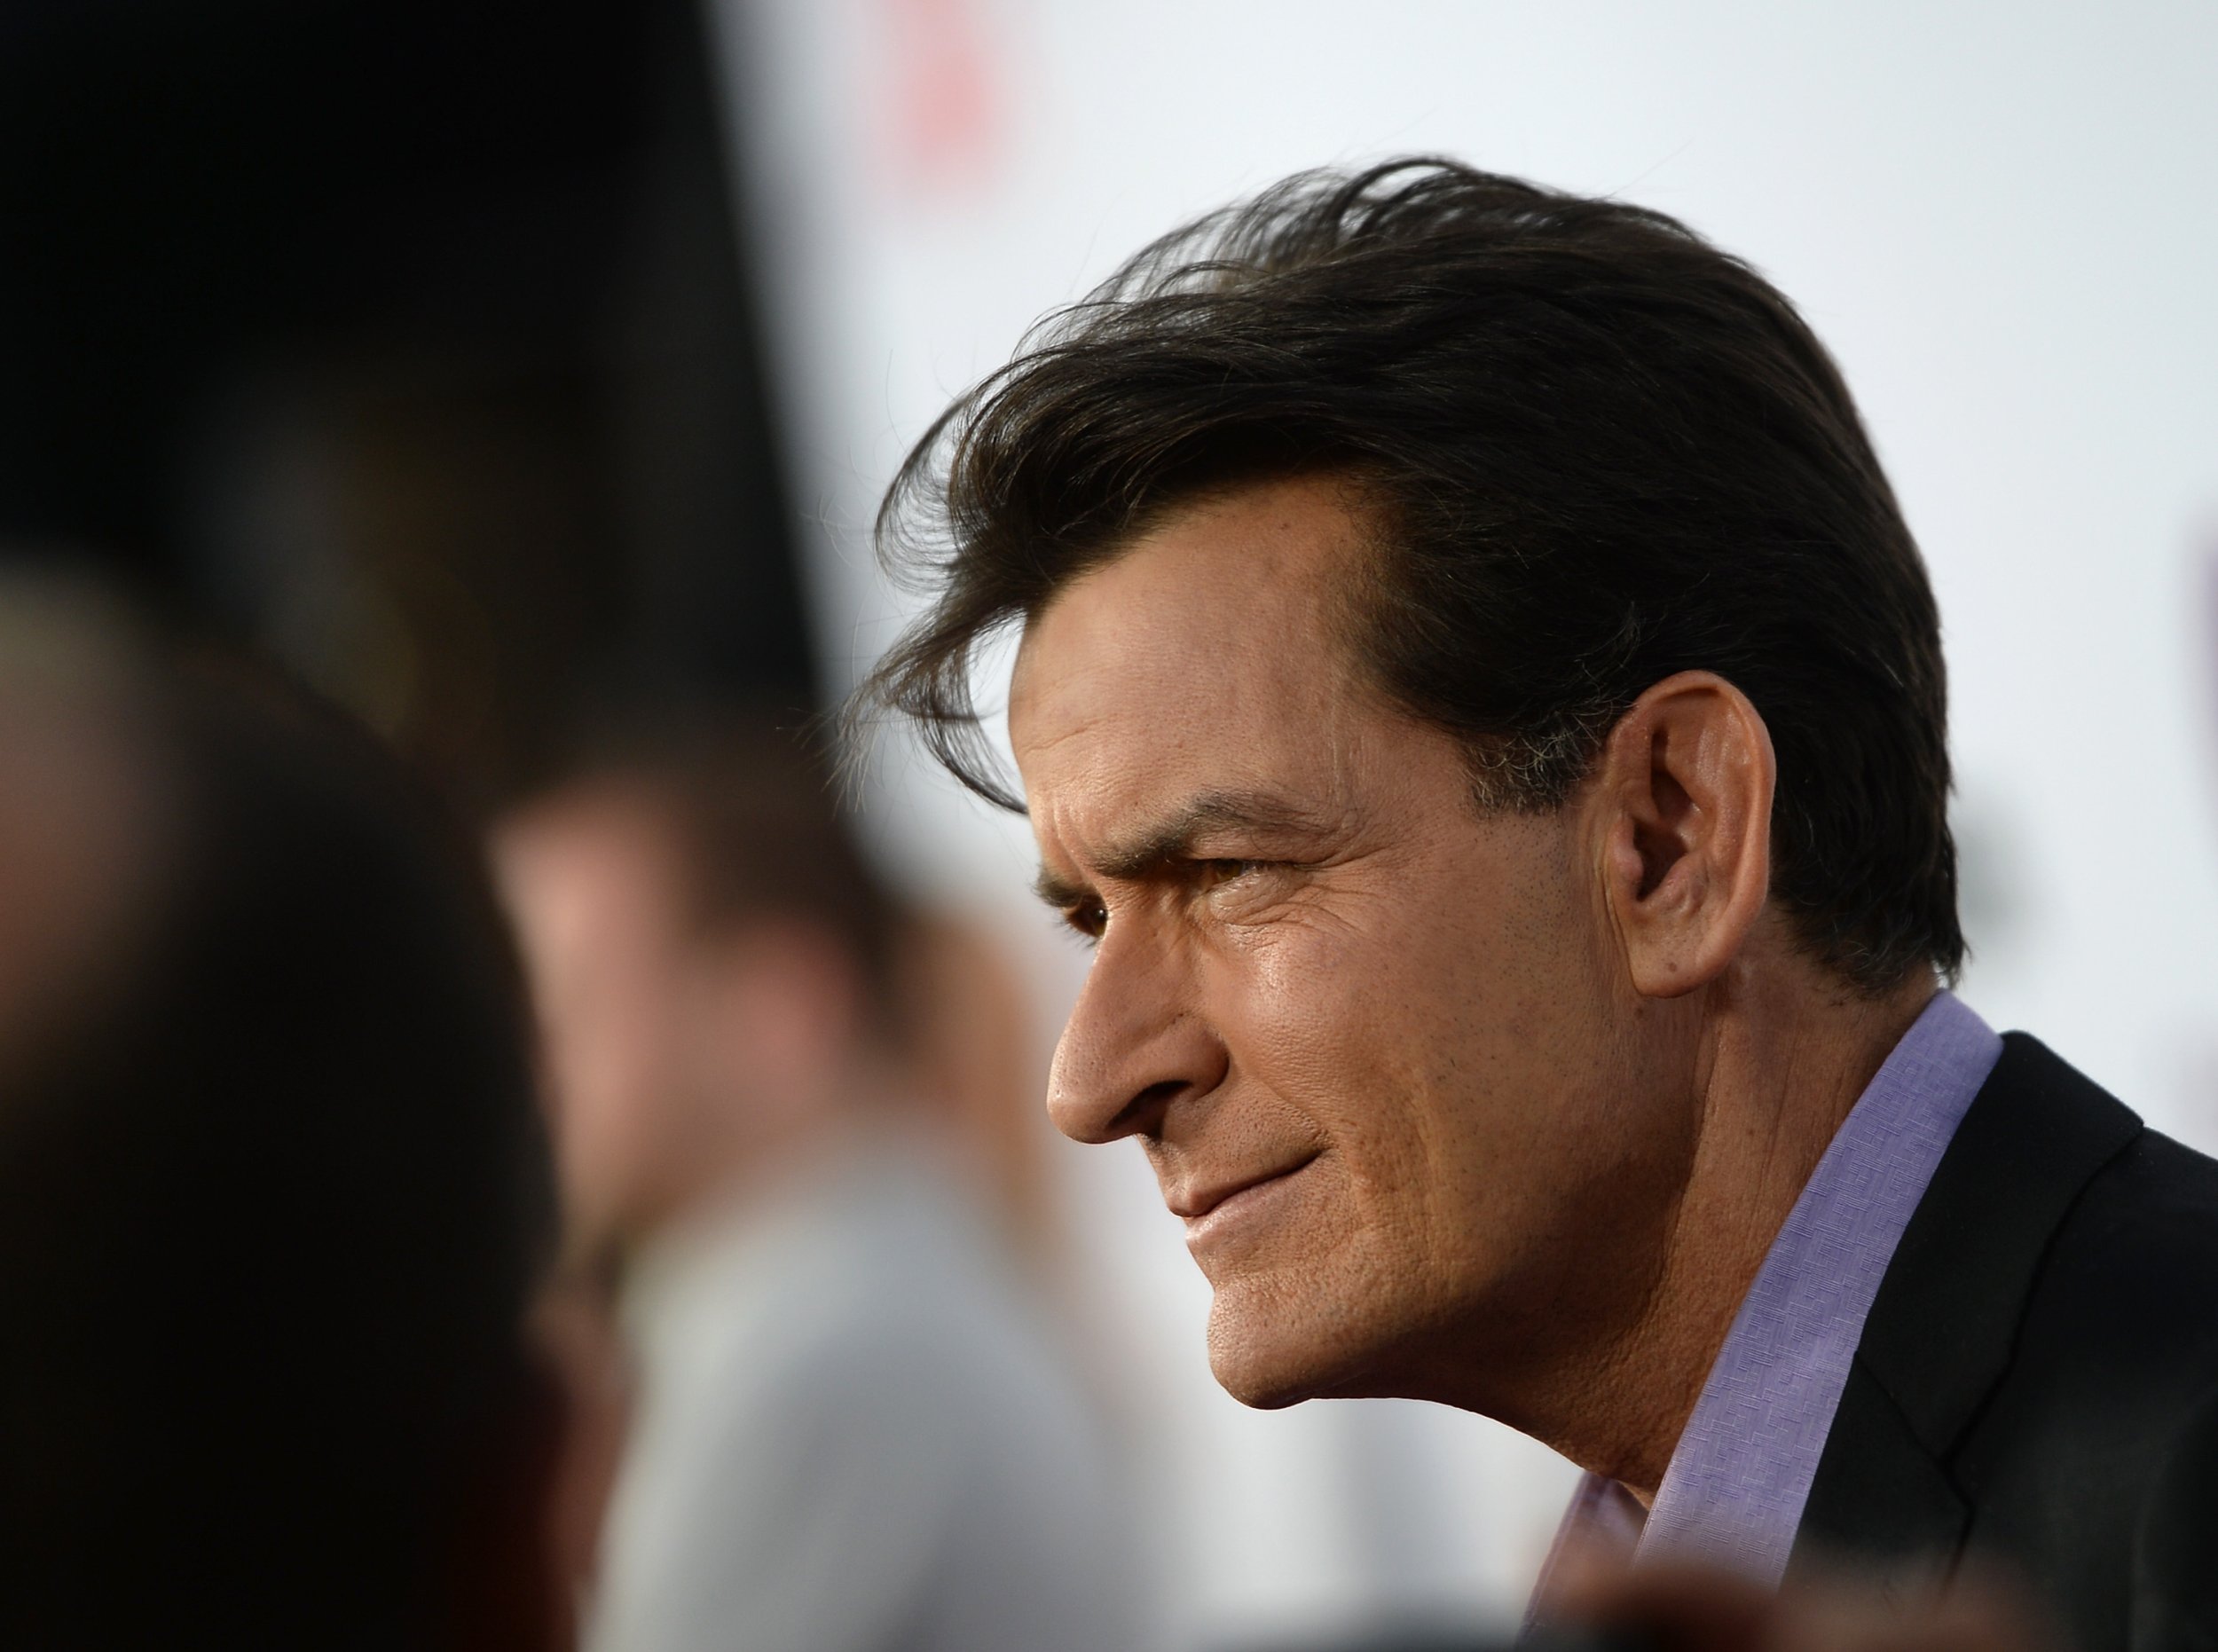 Charlie Sheen HIV Update 4 Fast Facts About How The Disease Affects